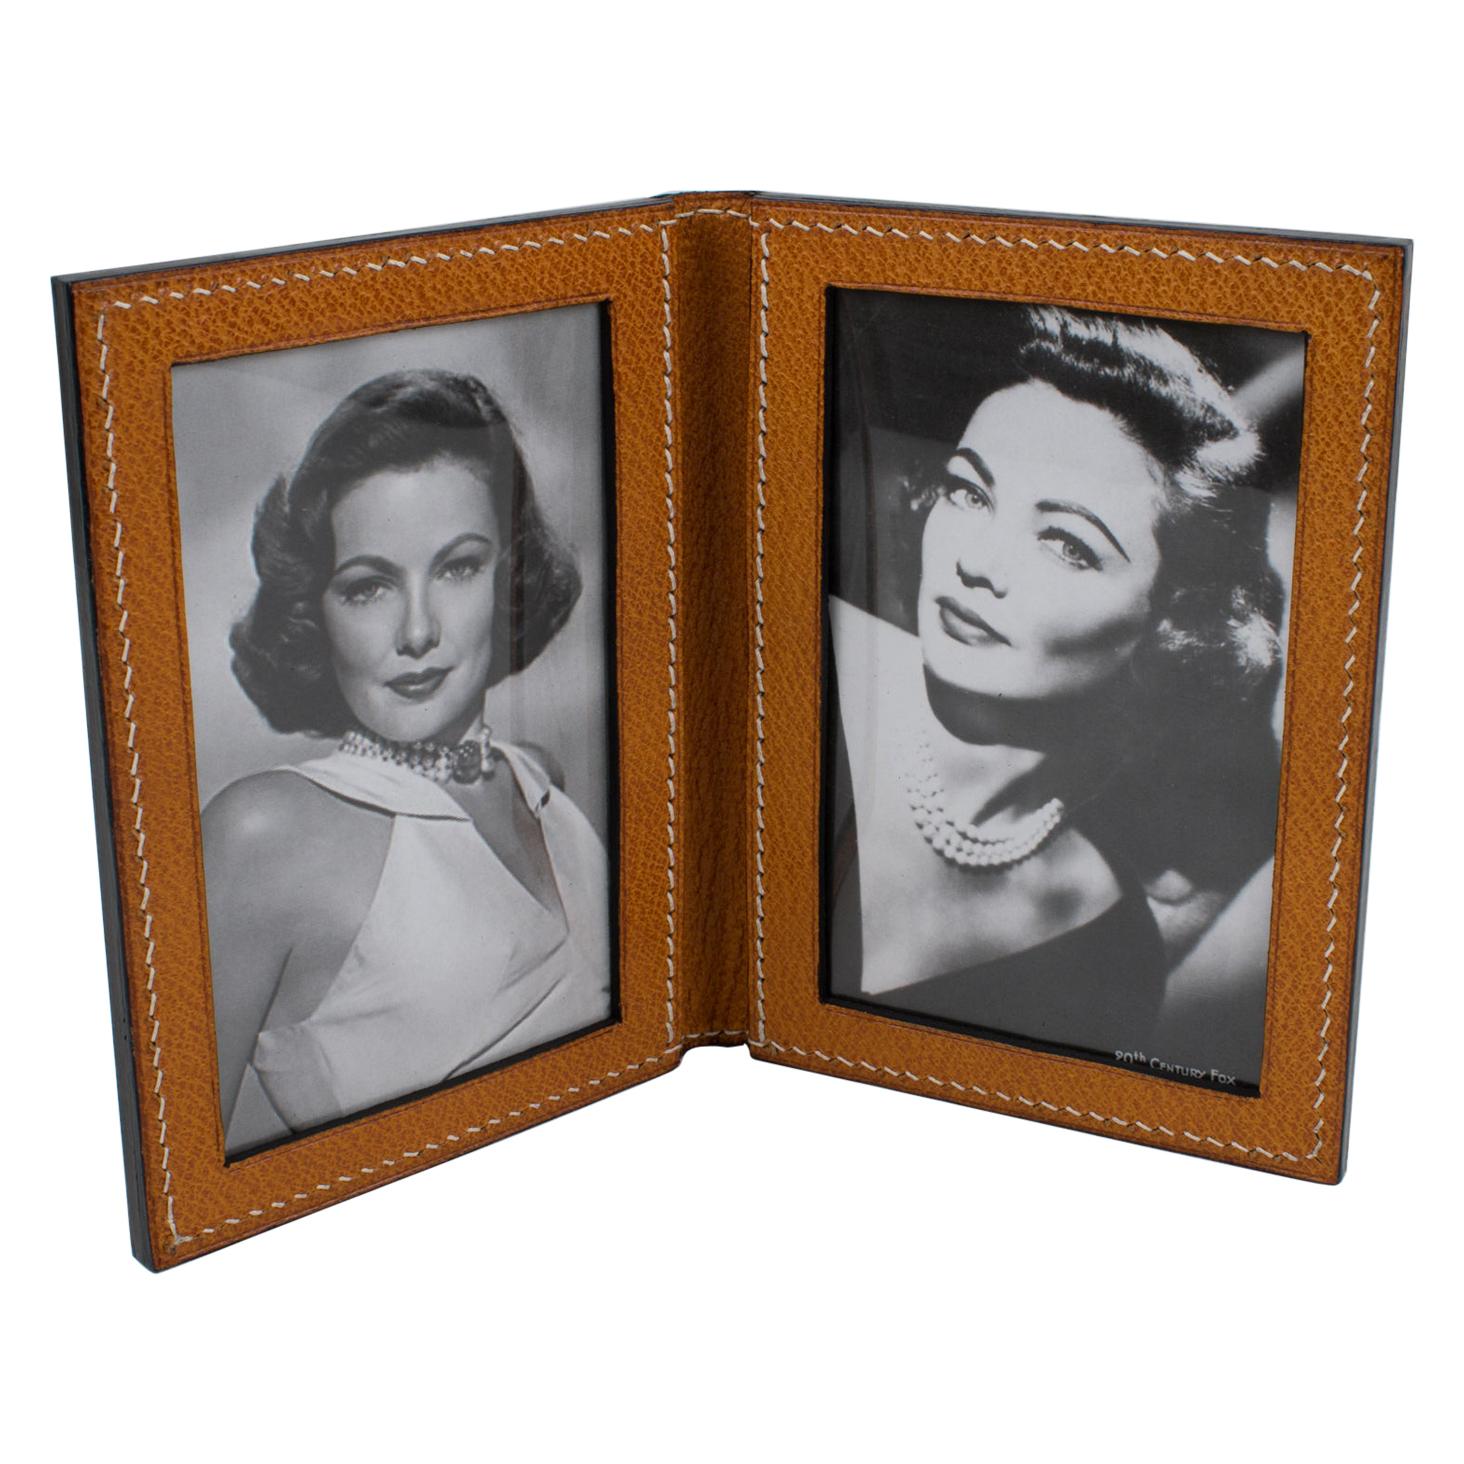 Longchamp 1940s Stitched Leather Double View Picture Frame